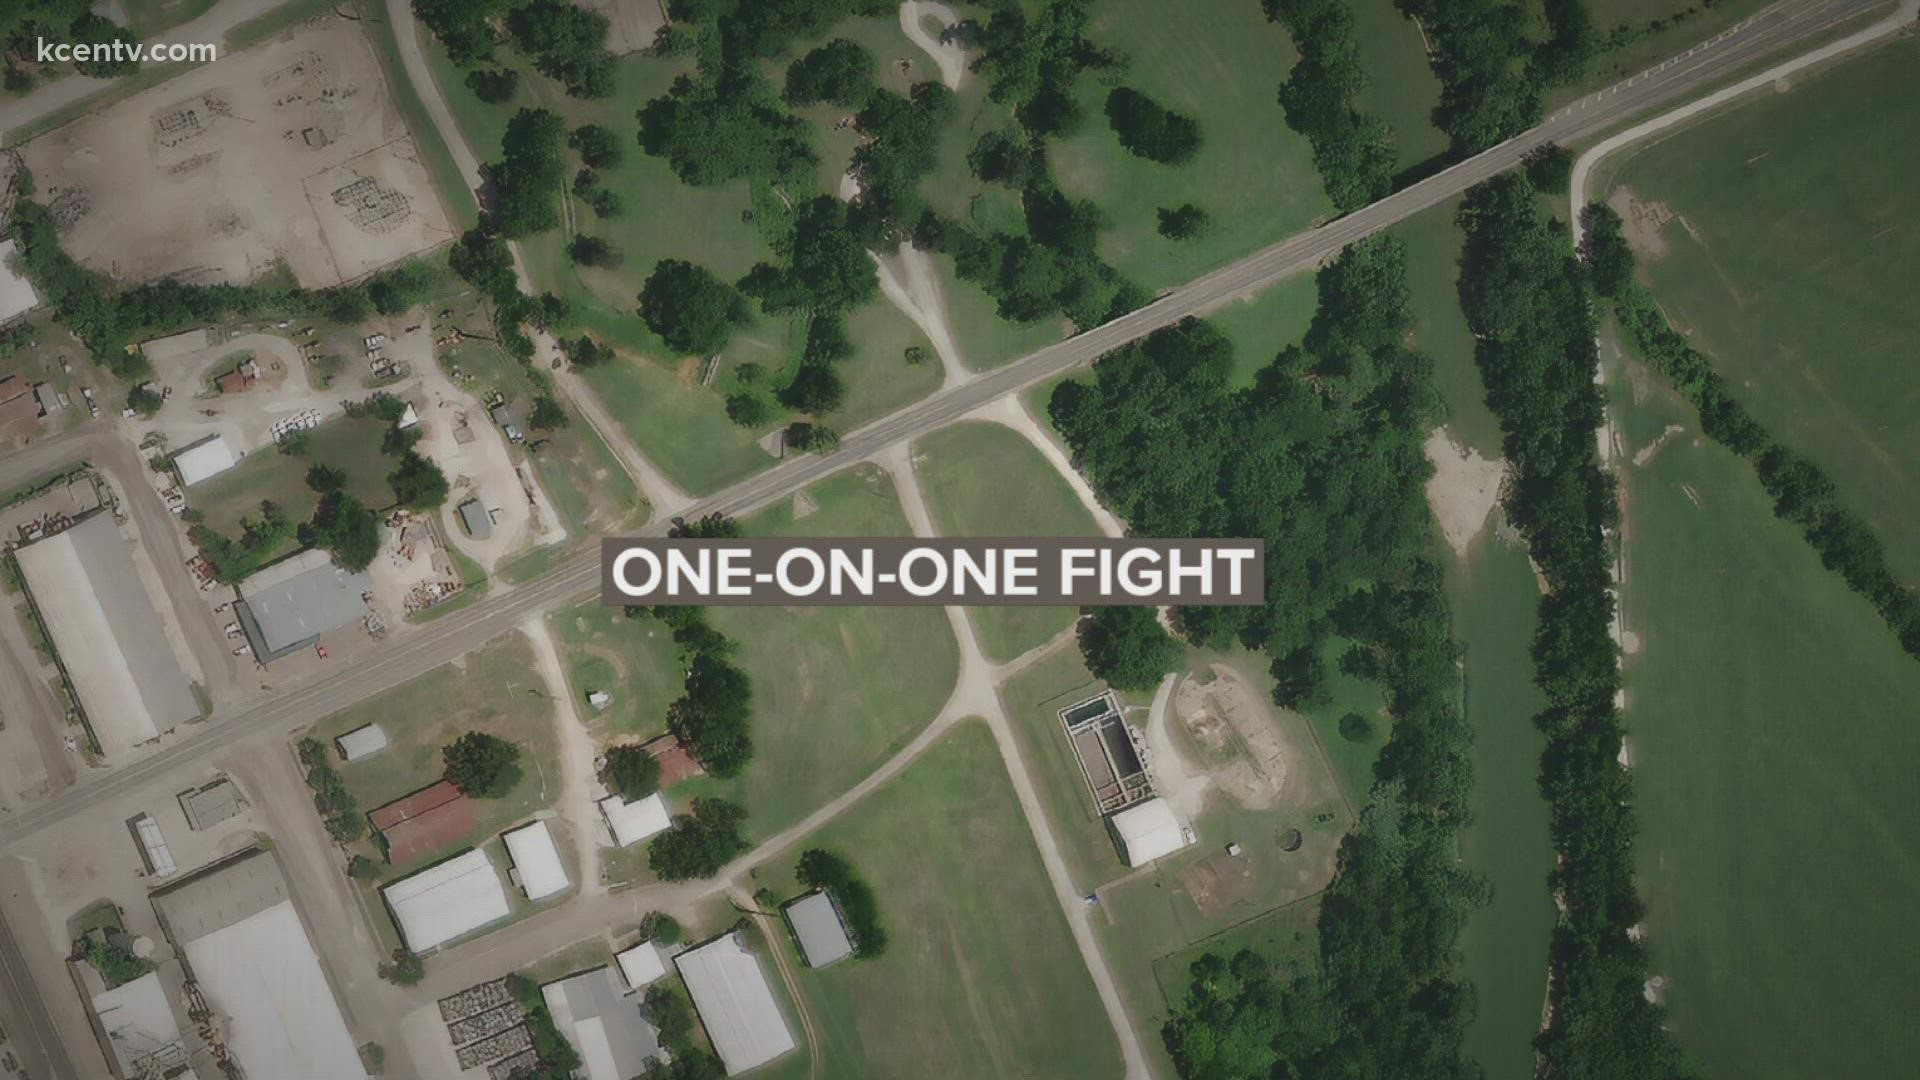 Investigating police say after obtaining a video of the fight, they can confirm that it was an one-on-one altercation.